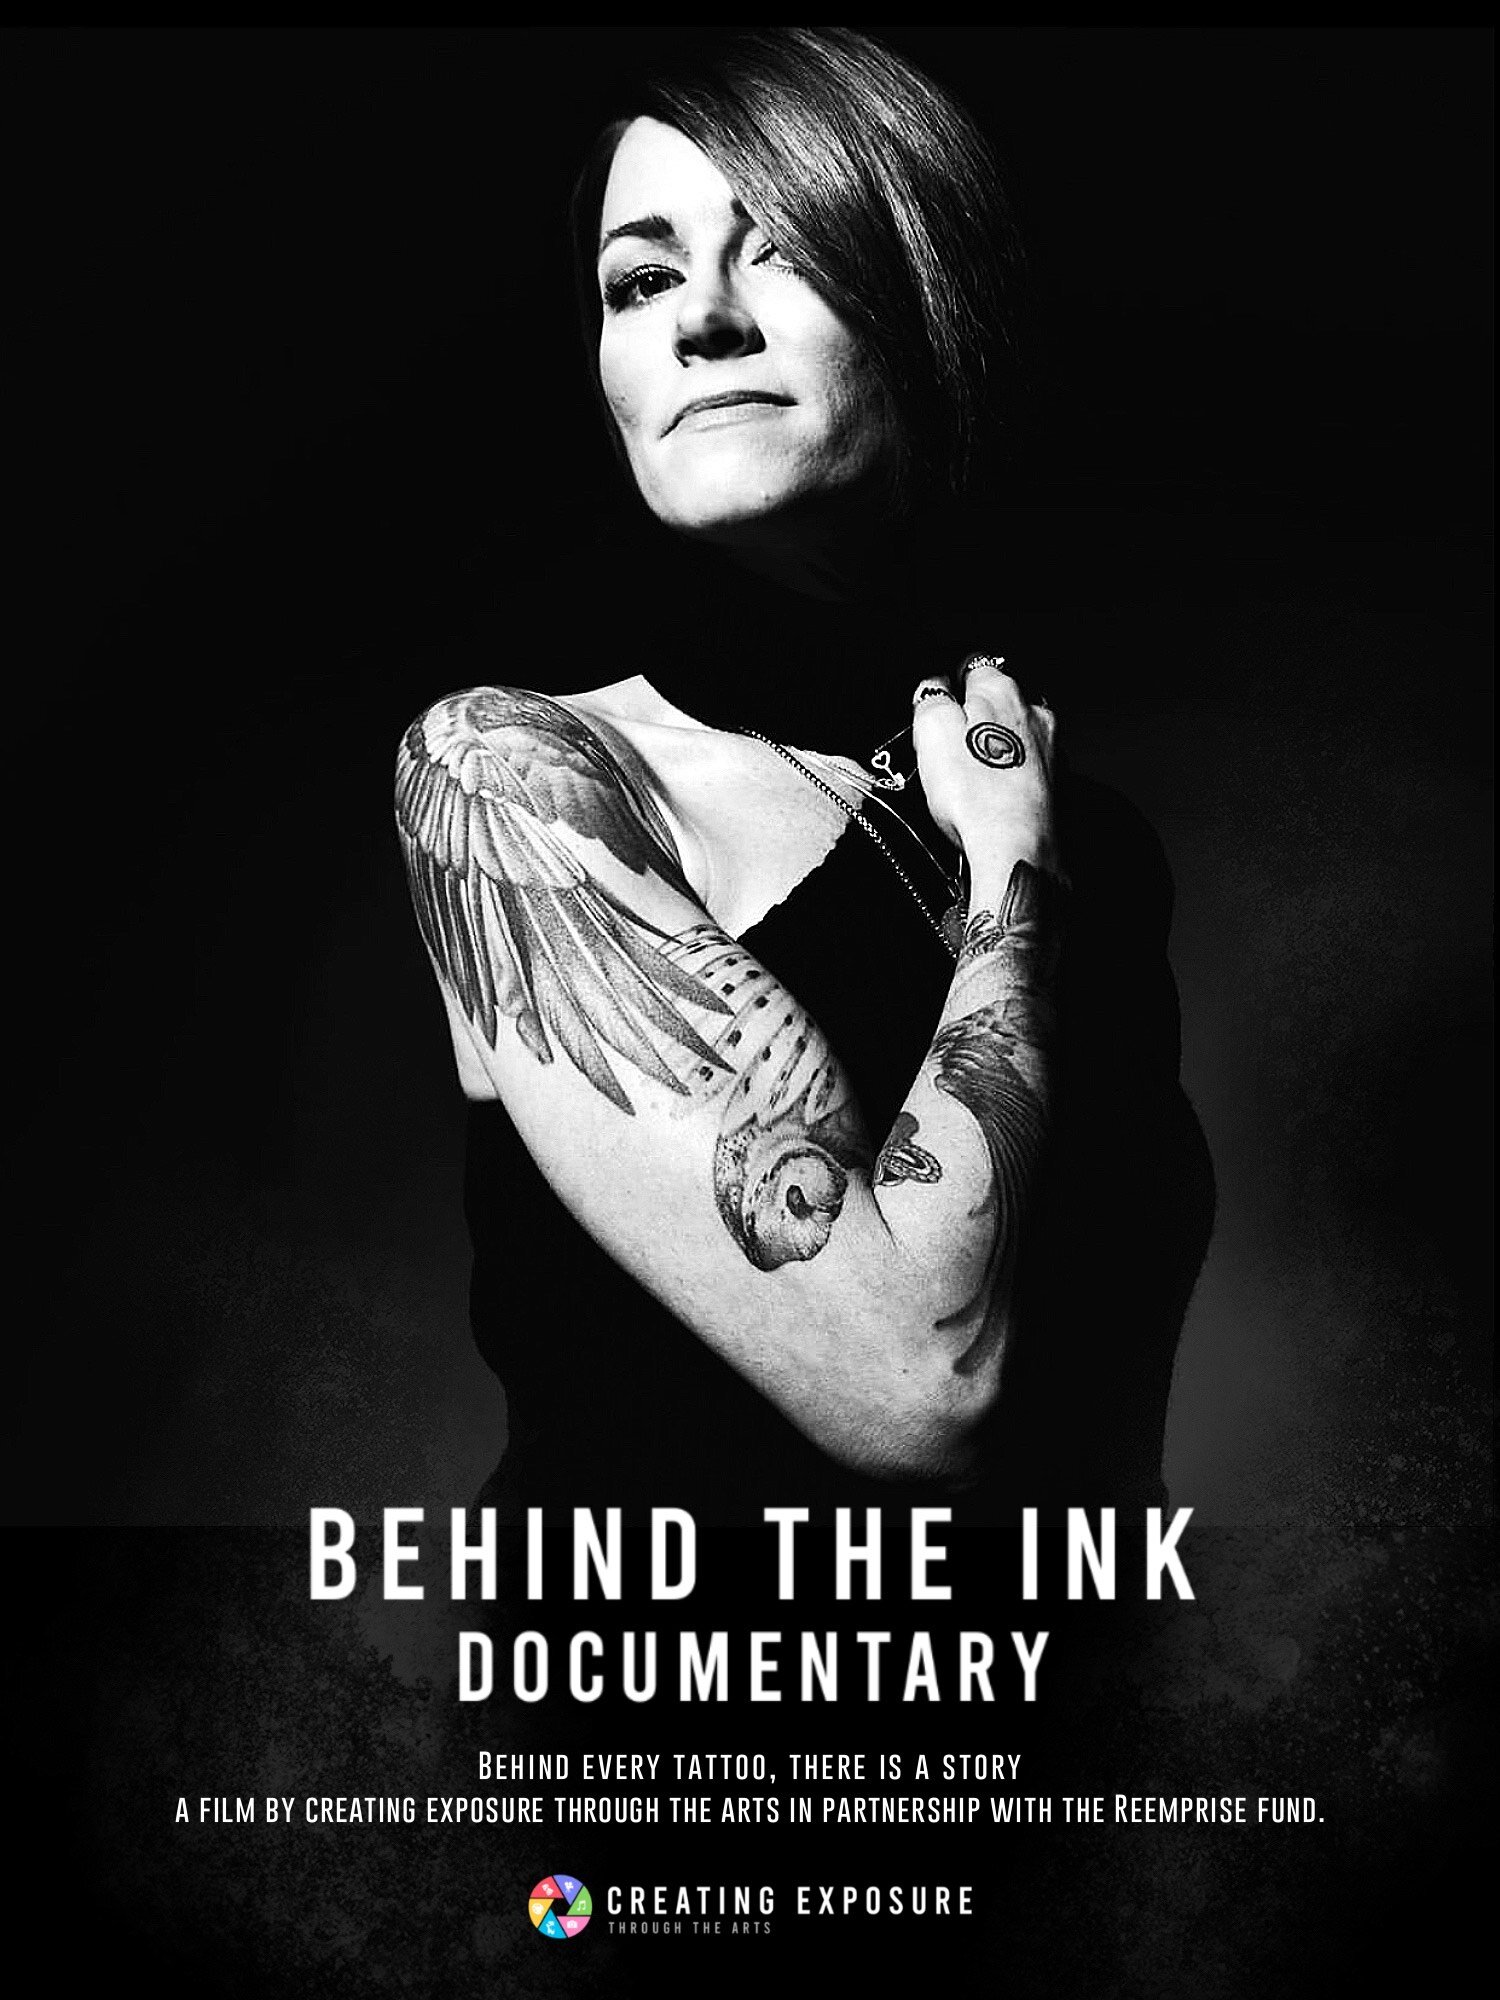 Behind The Ink Poster_Shannon Wooton.JPG